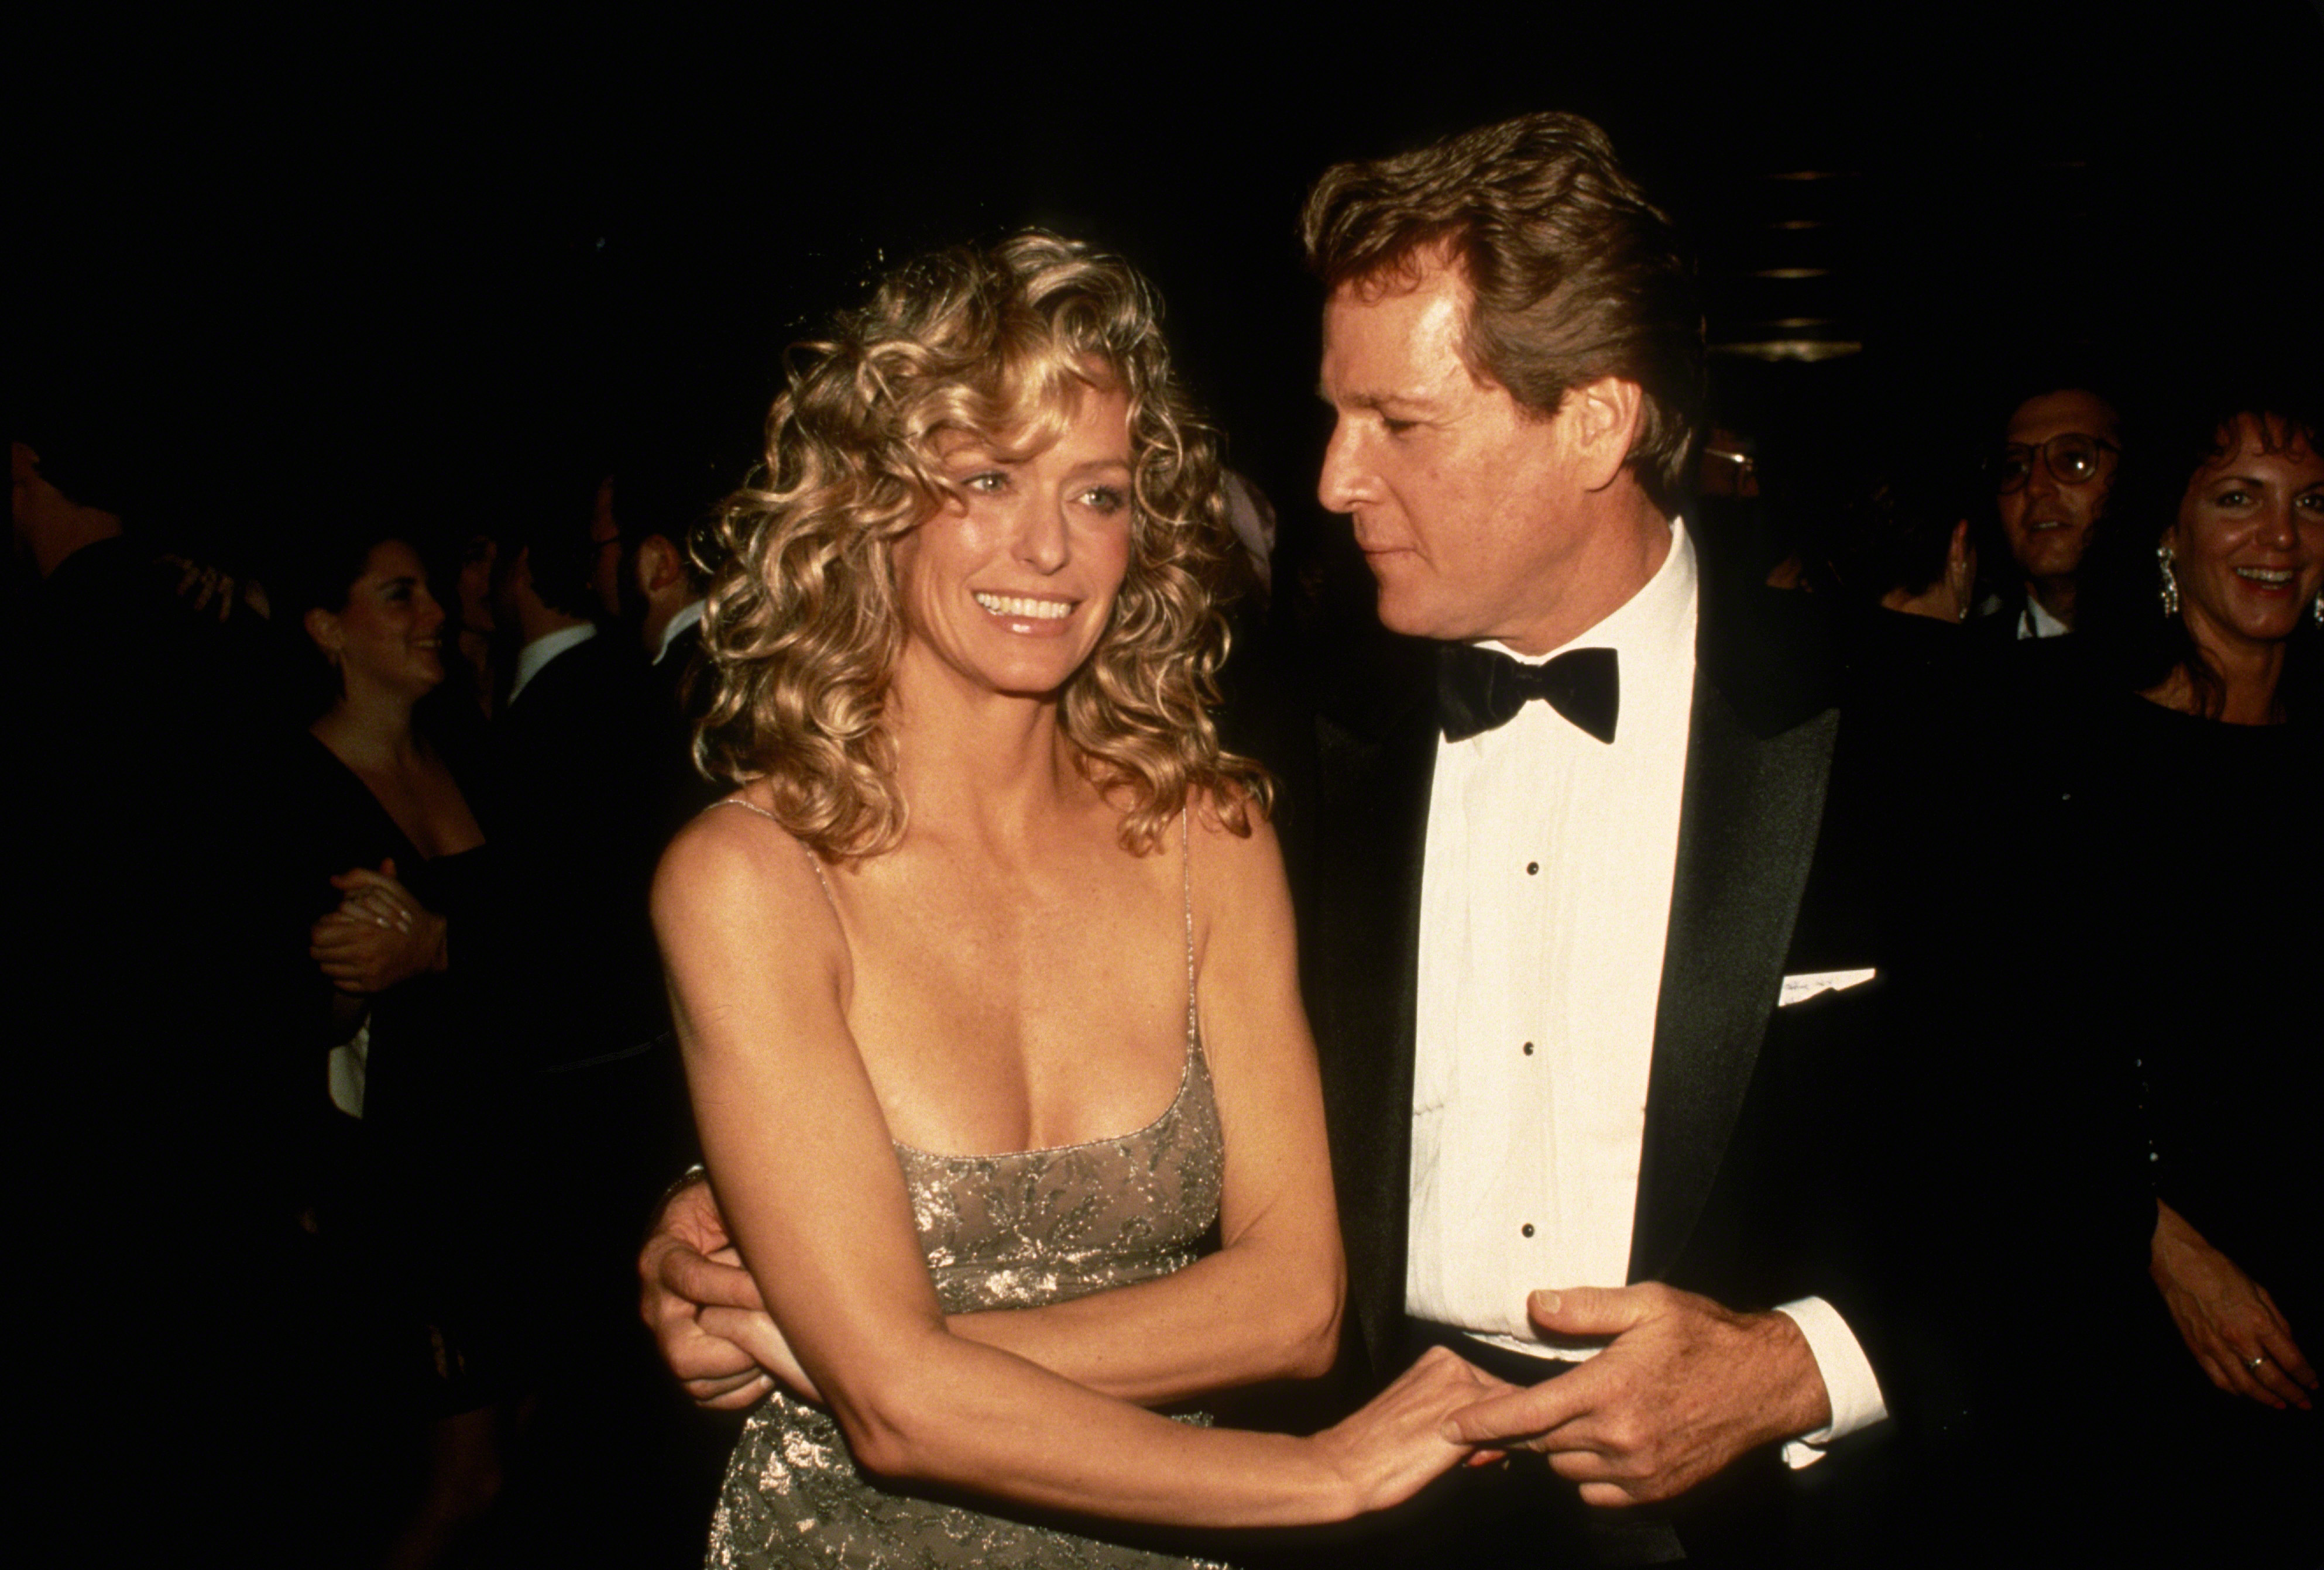 Farrah Fawcett and Ryan O'Neal attend the "Chances Are" premiere circa 1989 in New York City | Source: Getty Images